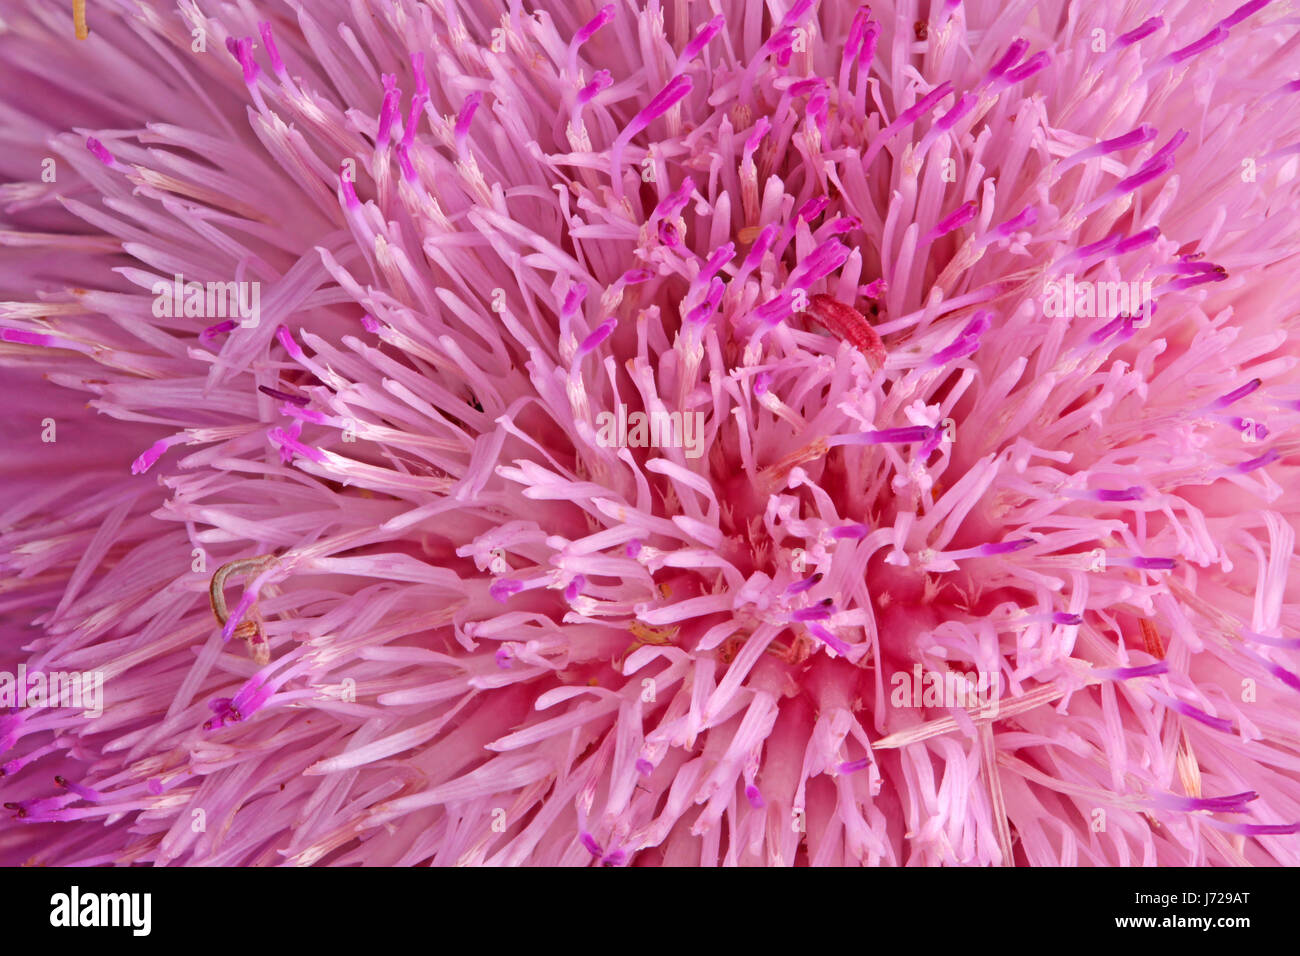 Purple compound flower of musk thistle (Carduus nutans) fills the frame of a flower background Stock Photo